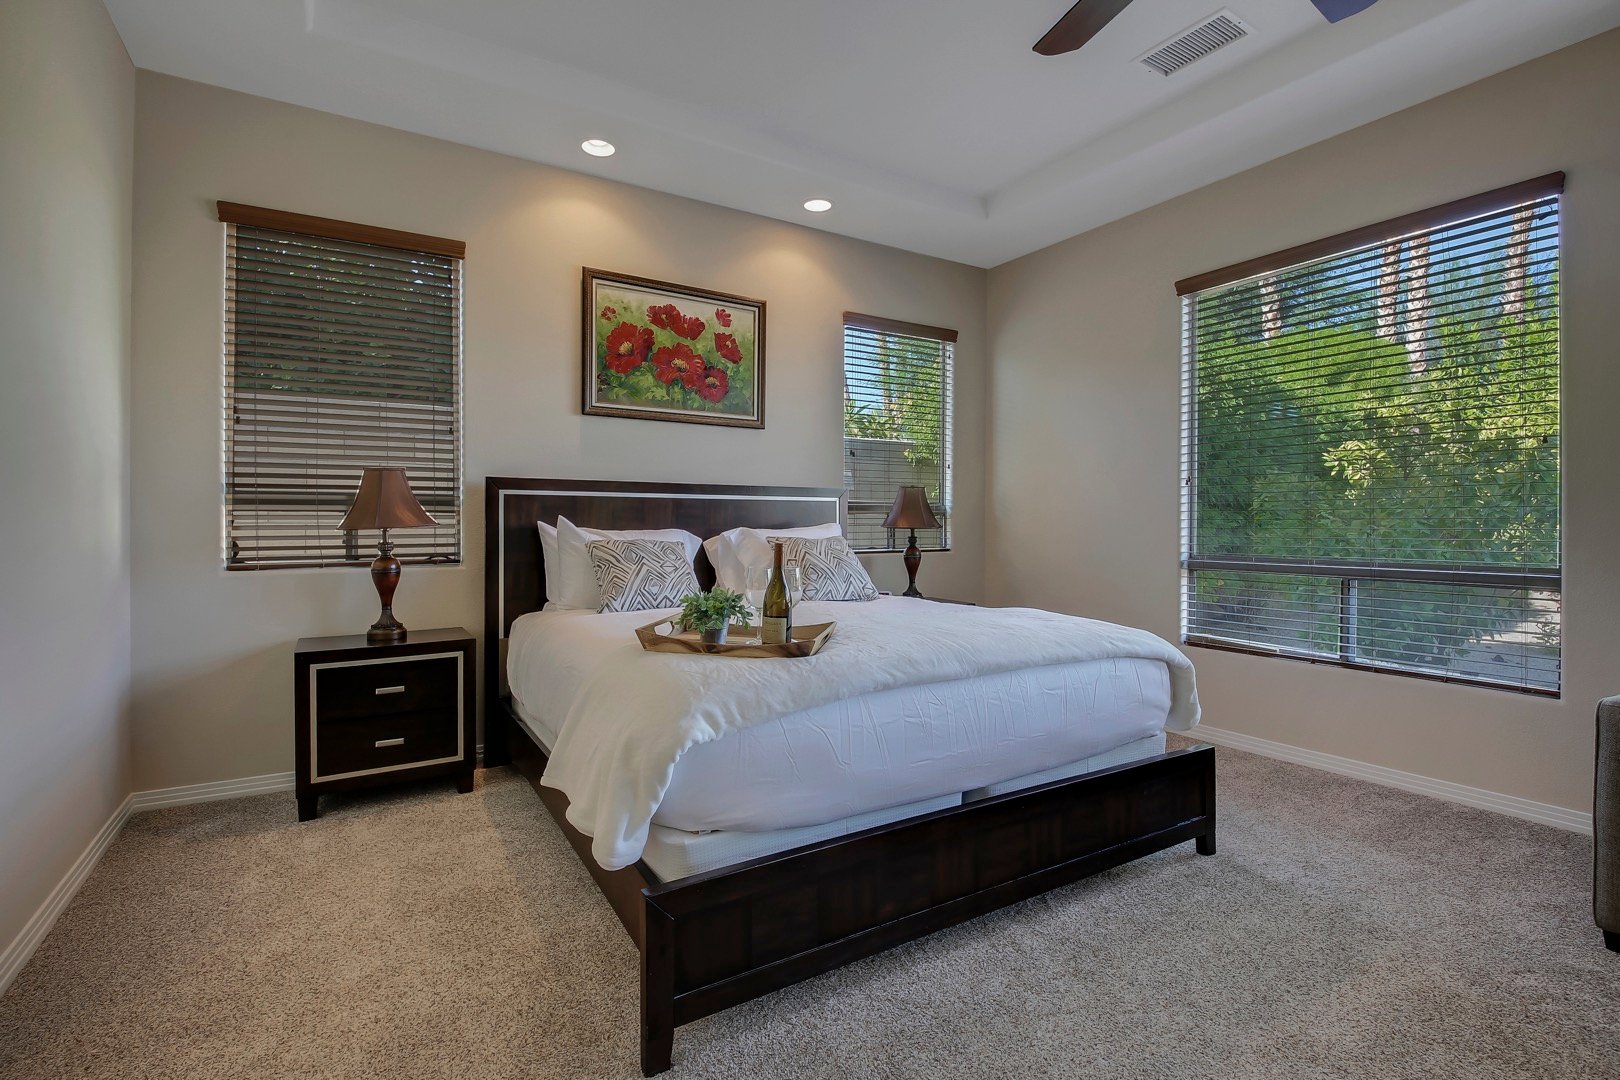 Master Suite 1 is located halfway down the hallway with so many features!